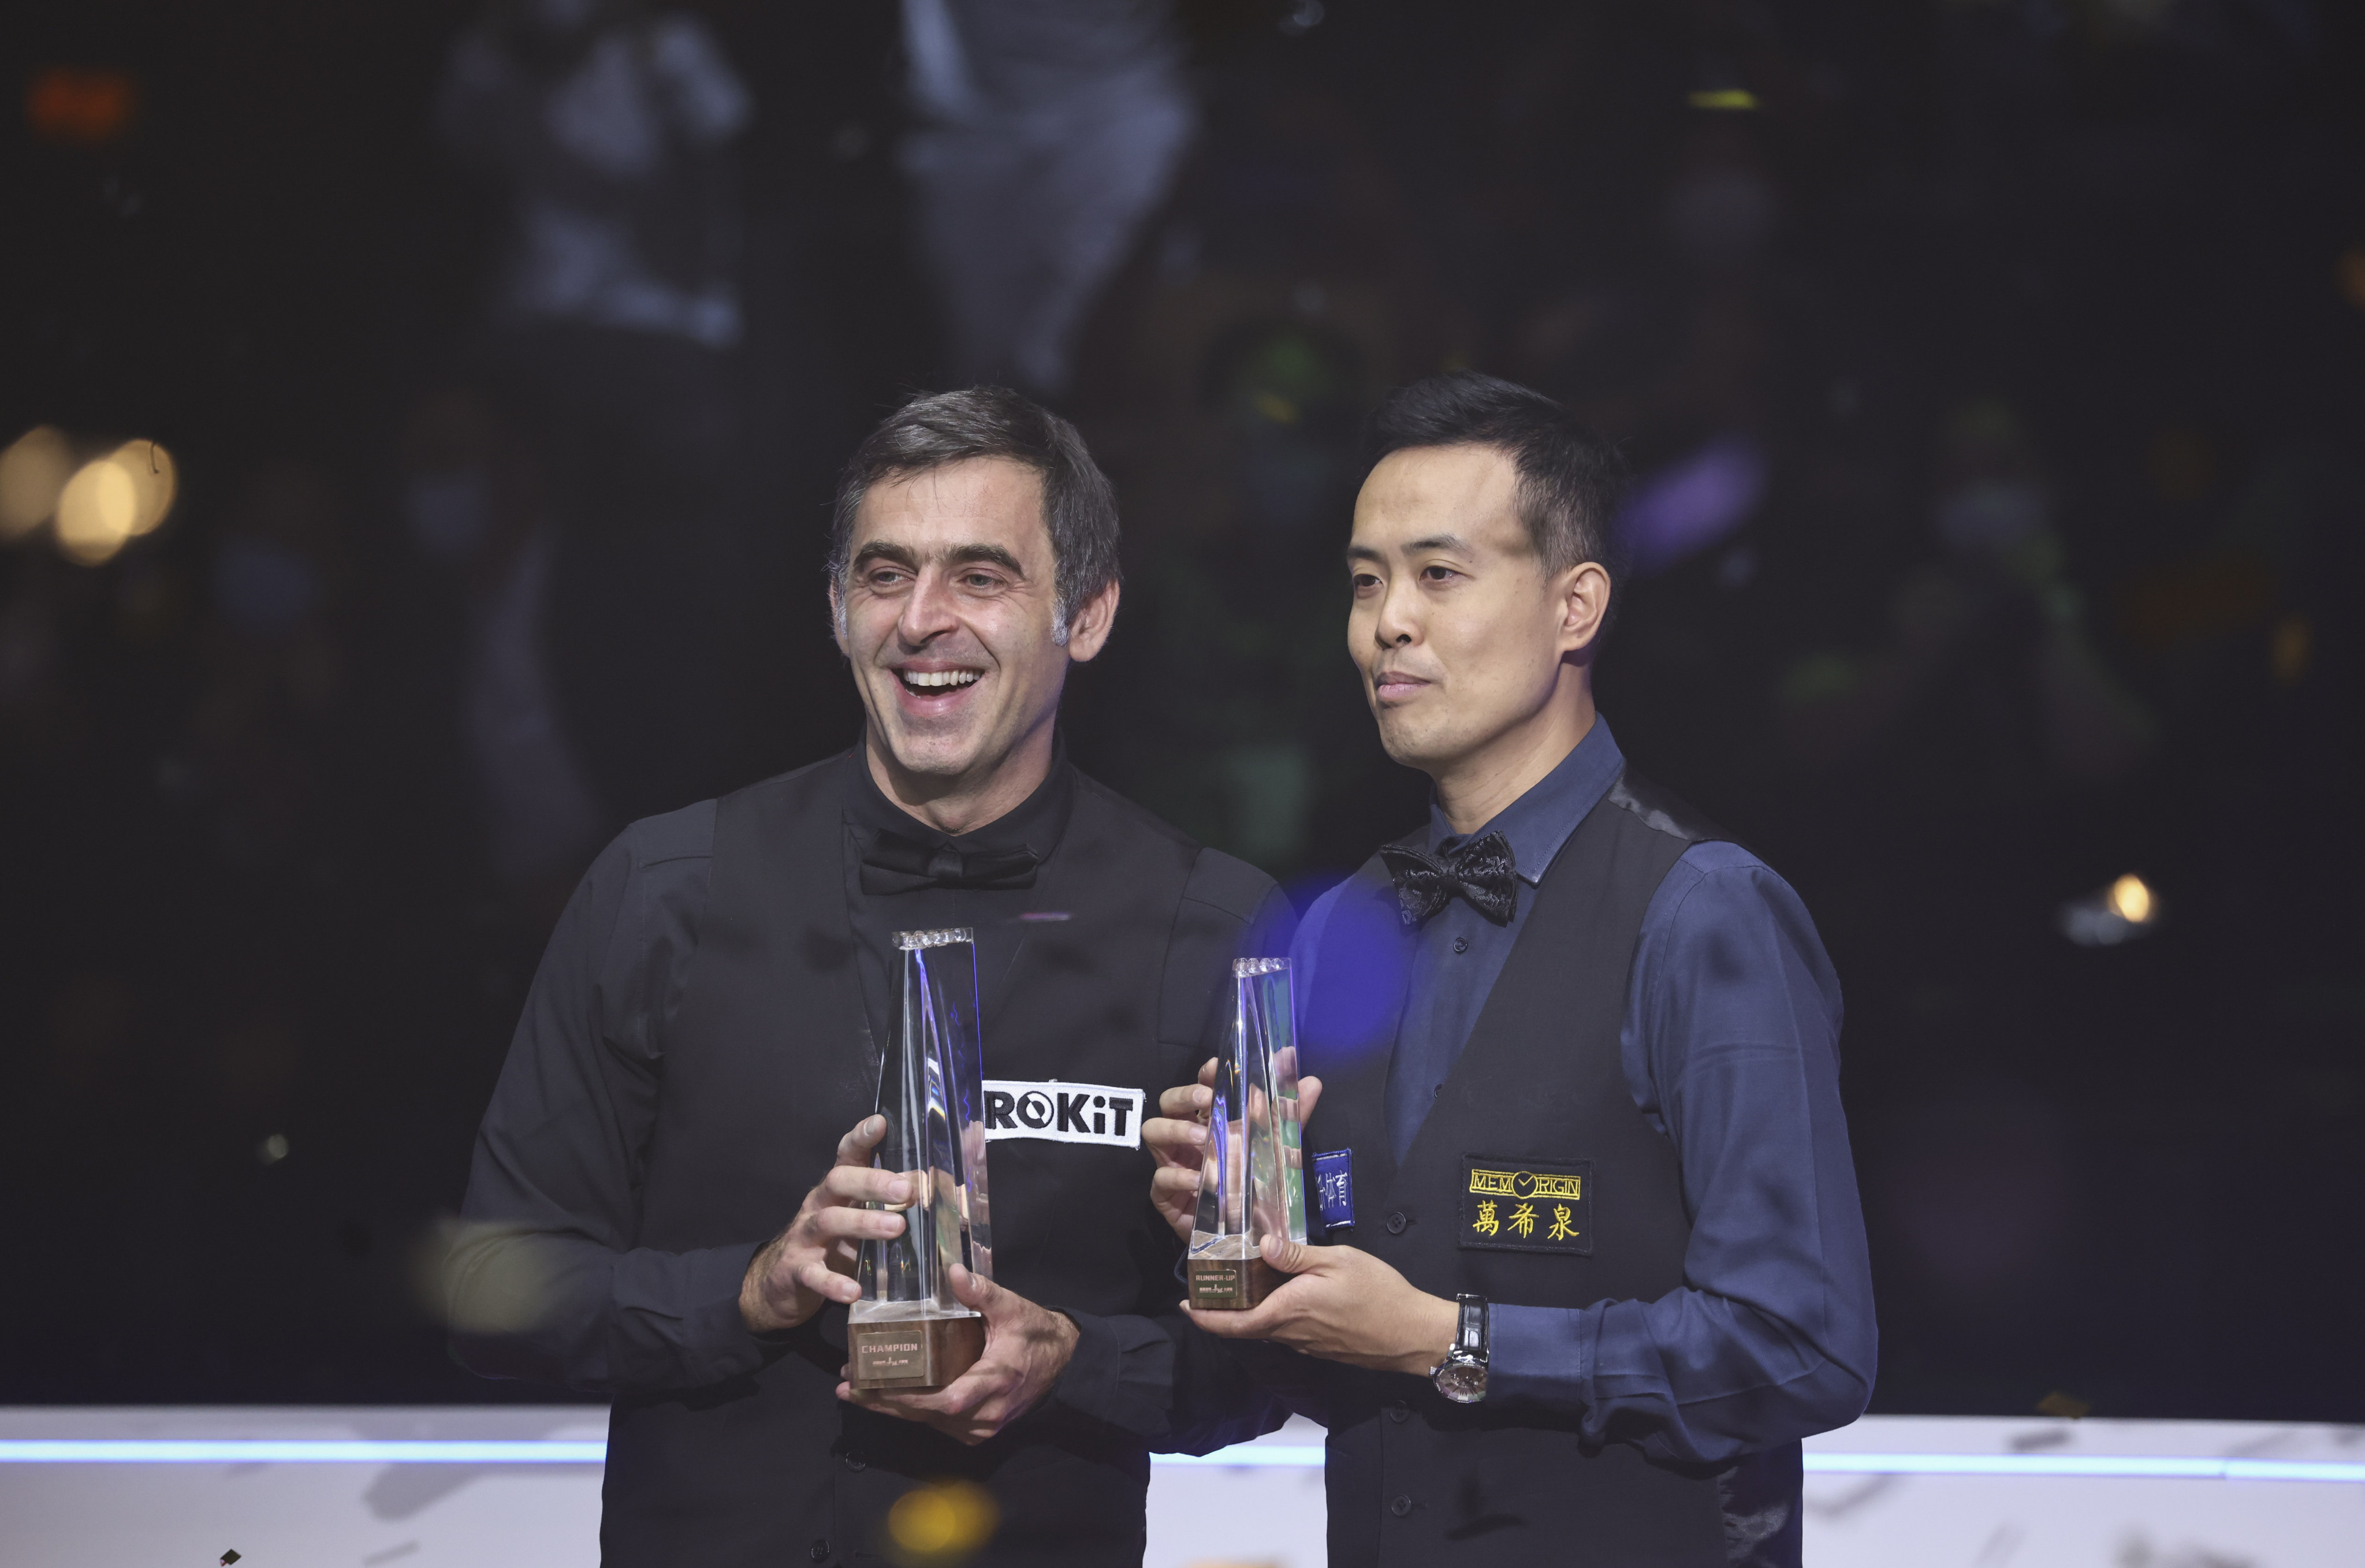 Ronnie O’Sullivan and Marco Fu receive their winner and runner-up trophies respectively after the Hong Kong Masters final. Photo: K.Y. Cheng